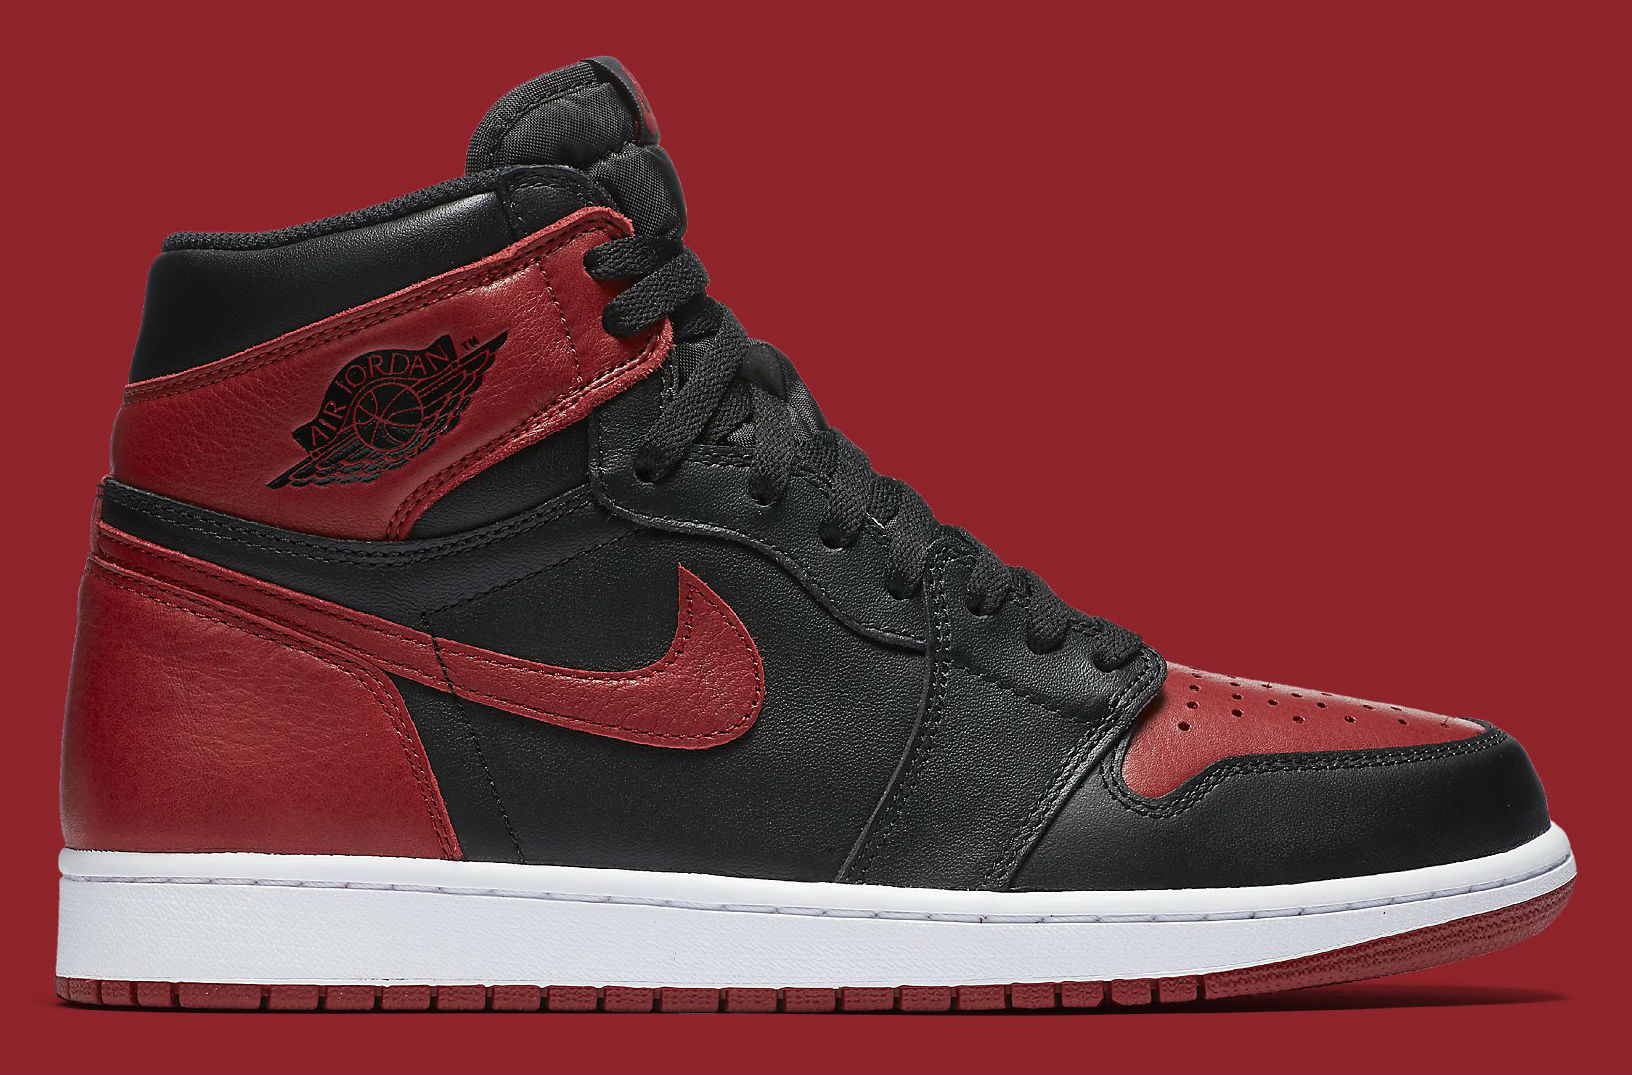 Why Are Air Jordan 1's Banned?